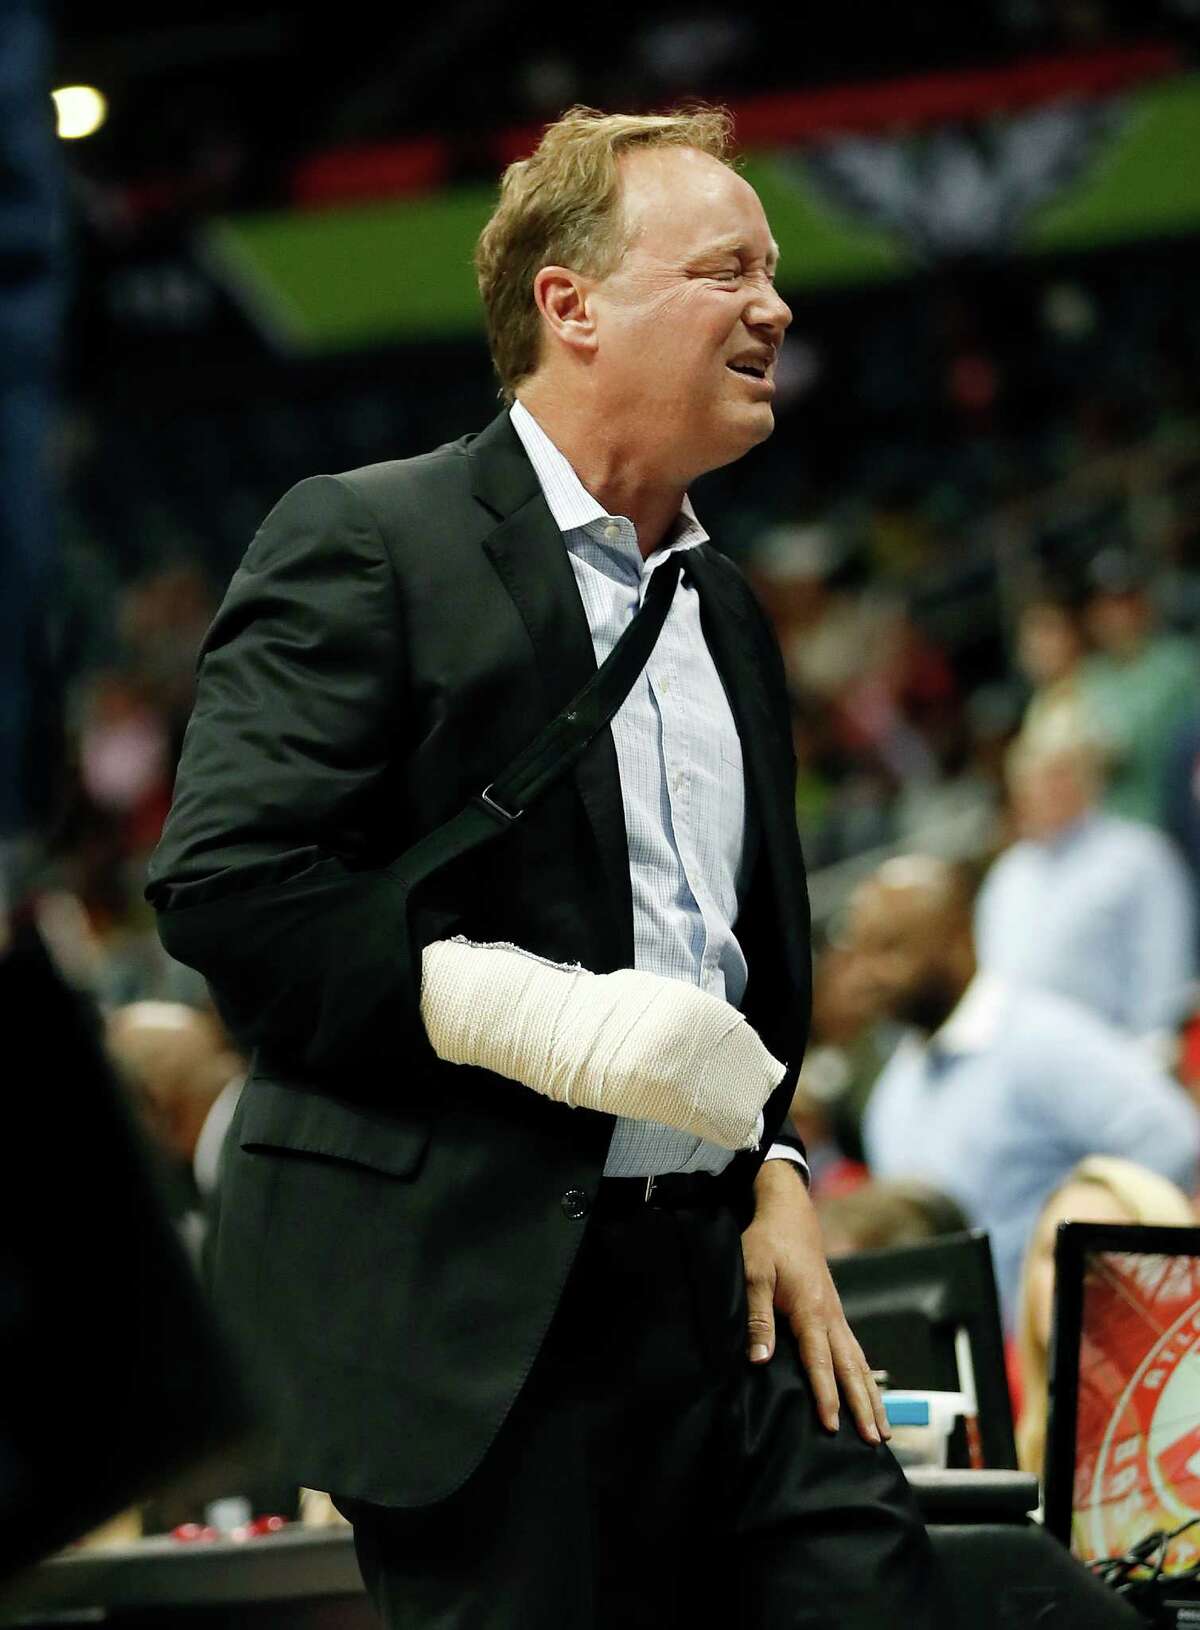 Atlanta Hawks coach Mike Budenholzer holds his leg and grimaces after he was run over on the sideline during the first half of the team's preseason NBA basketball game against the New Orleans Pelicans on Tuesday, Oct. 18, 2016, in Atlanta. Budenholzer, who was already nursing an injured hand, left the game. (AP Photo/John Bazemore)